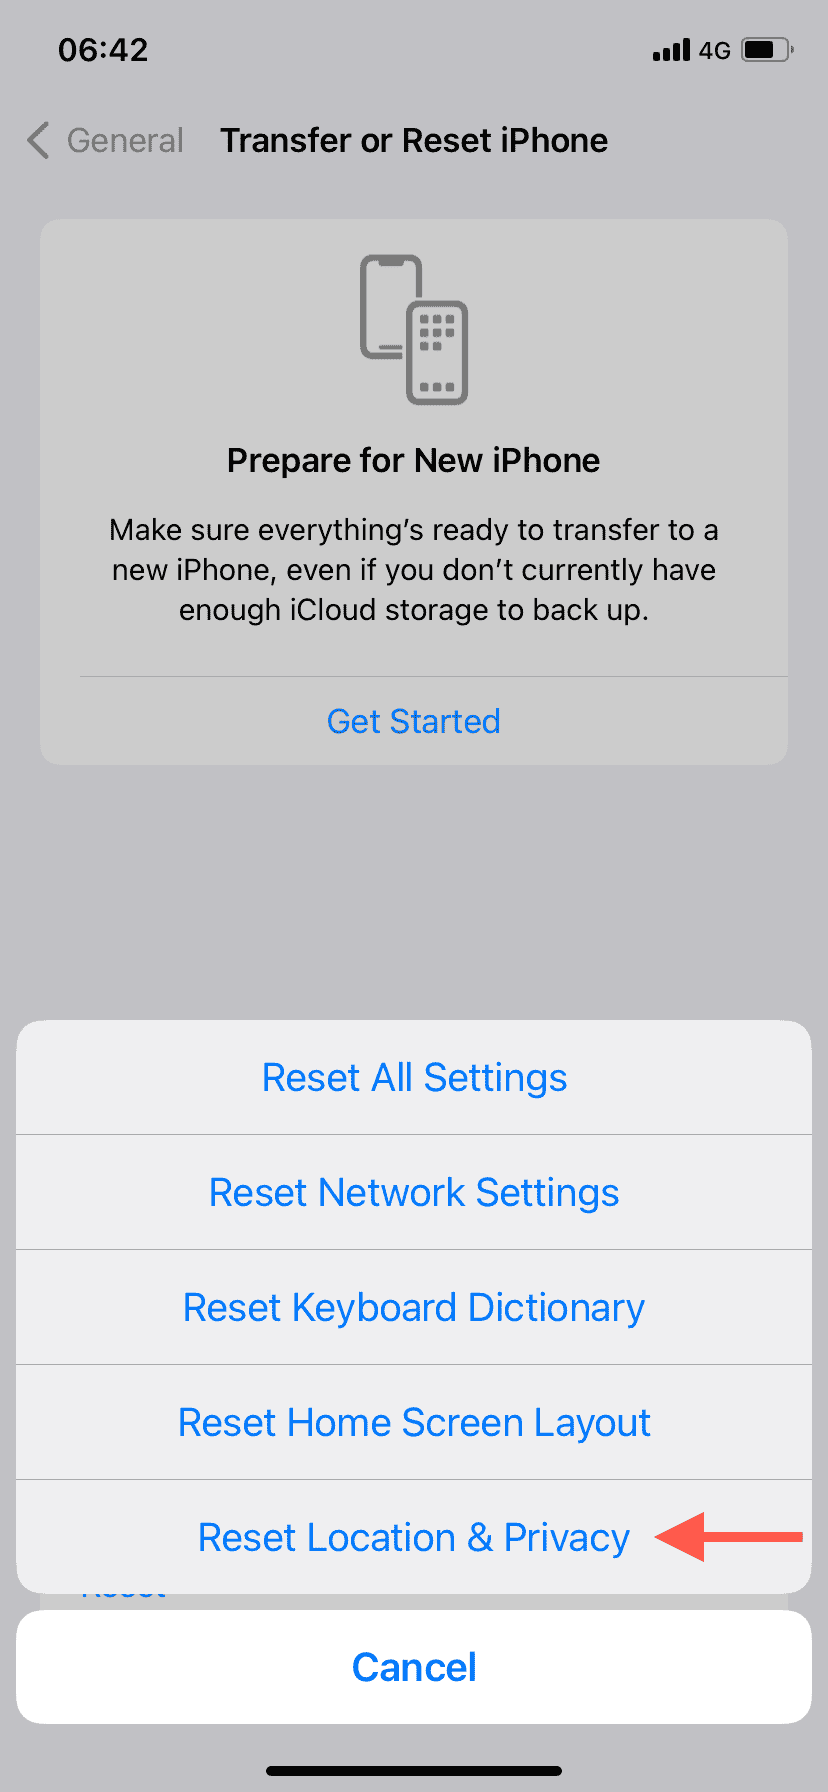 The Reset Network Settings option highlighted in the iPhone's Reset menu.